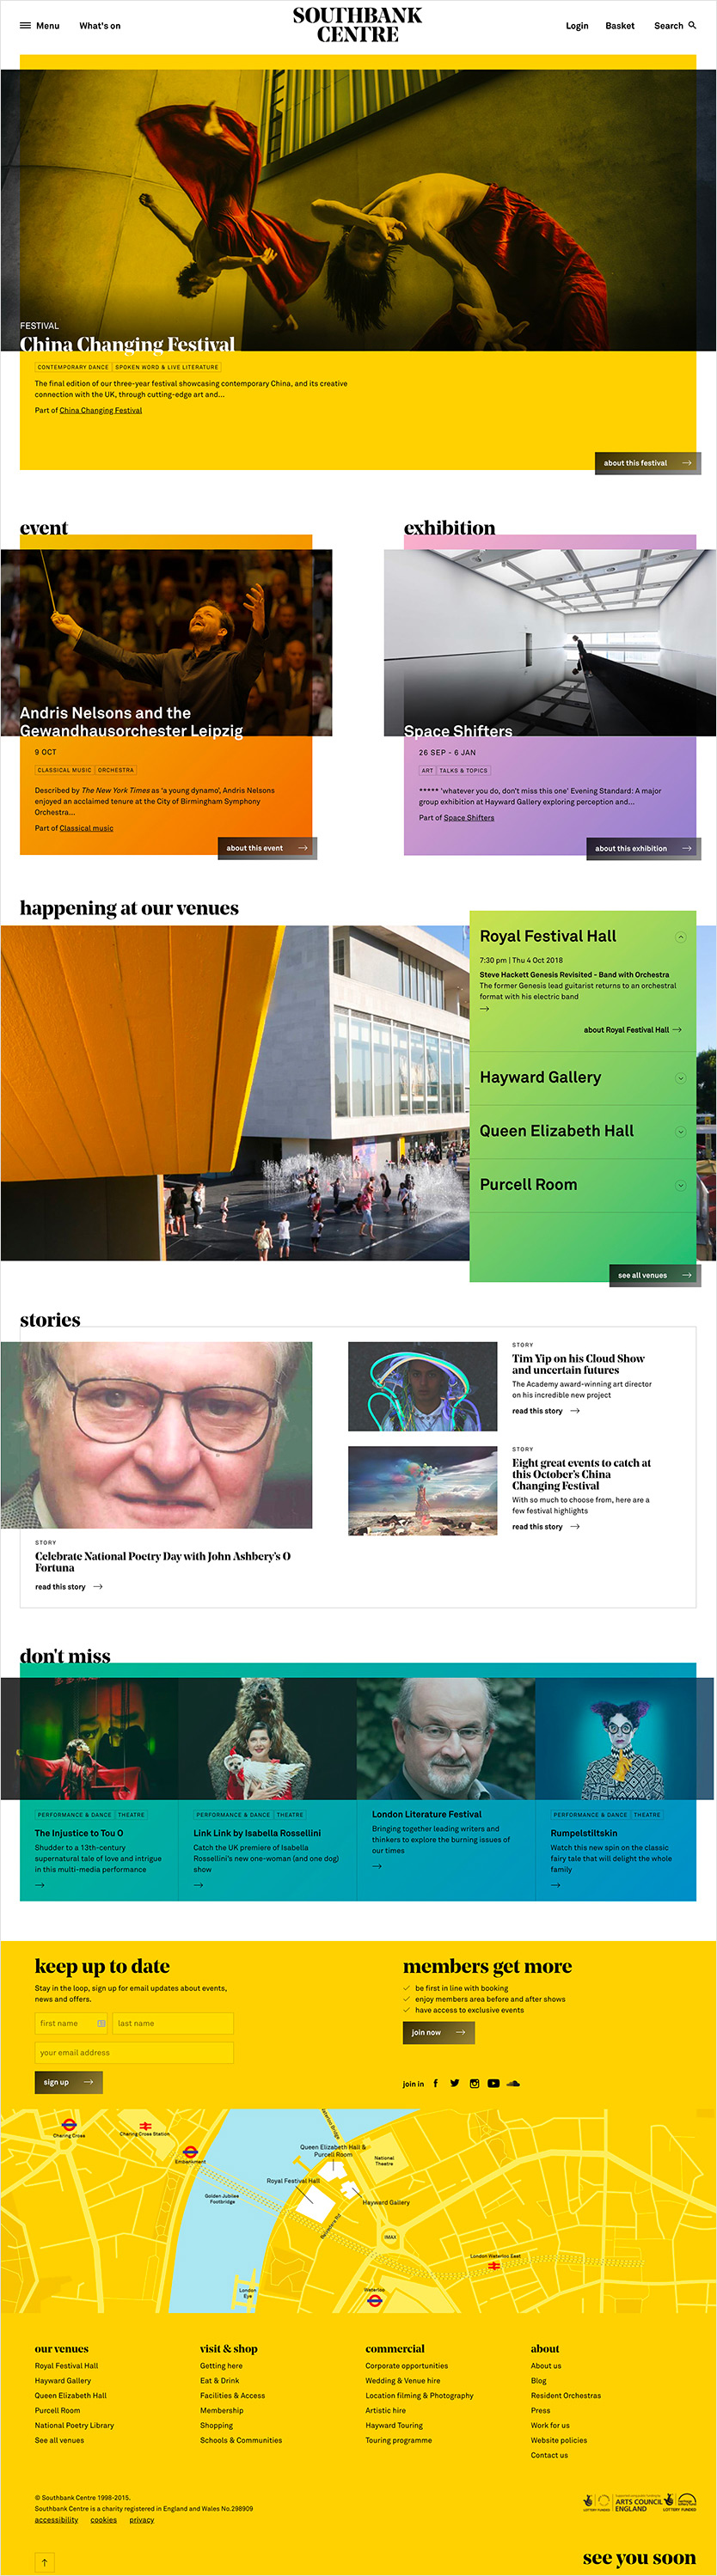 Southbank Centre website homepage